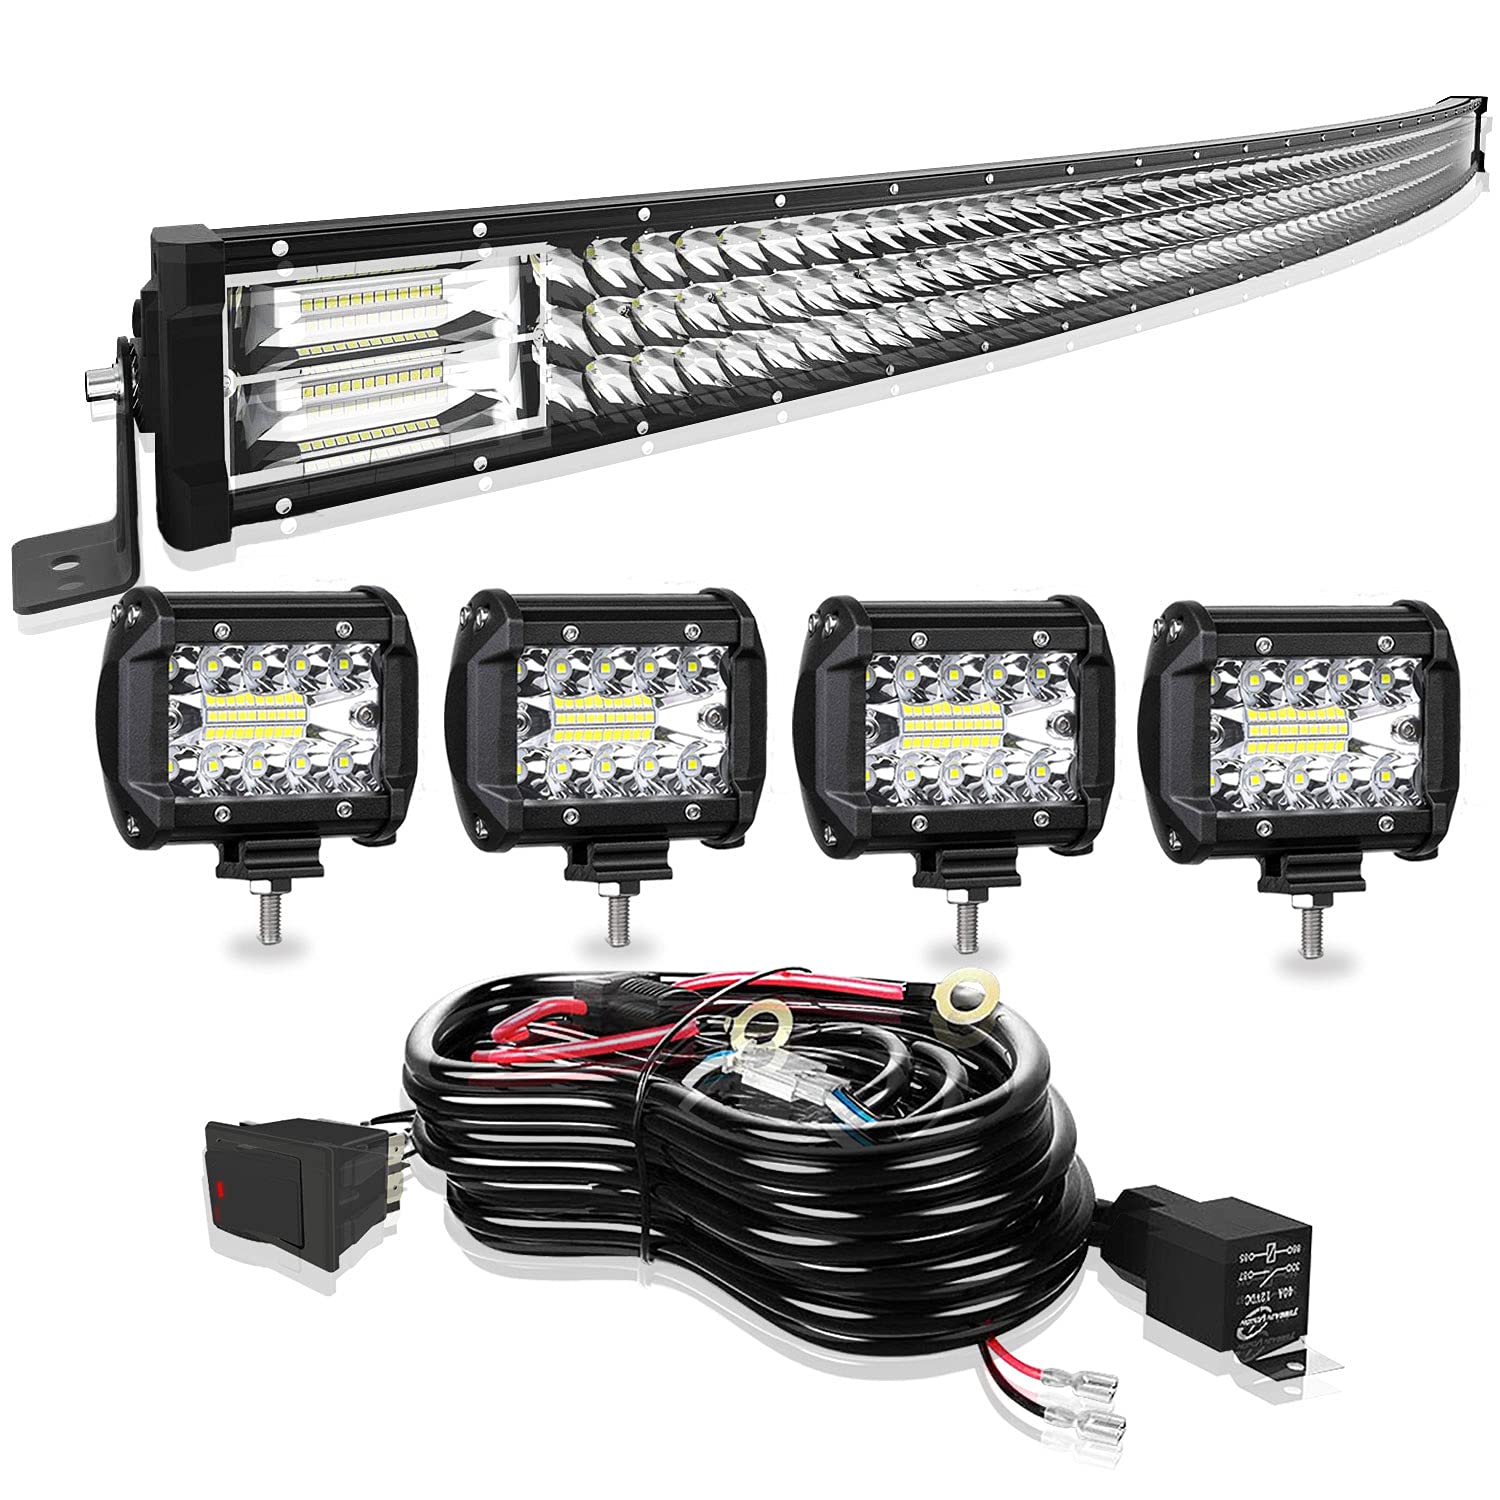 TURBO SII Led Light Bar 30/32Inch 441W Curved Triple Row Offroad Led Bar Waterproof 44100LM Spot Flood Combo + 4Pcs 4 Inch Led Pods Fog Lights + Wiring for Truck SUV Polaris Ranger RZR Golf Cart 4x4